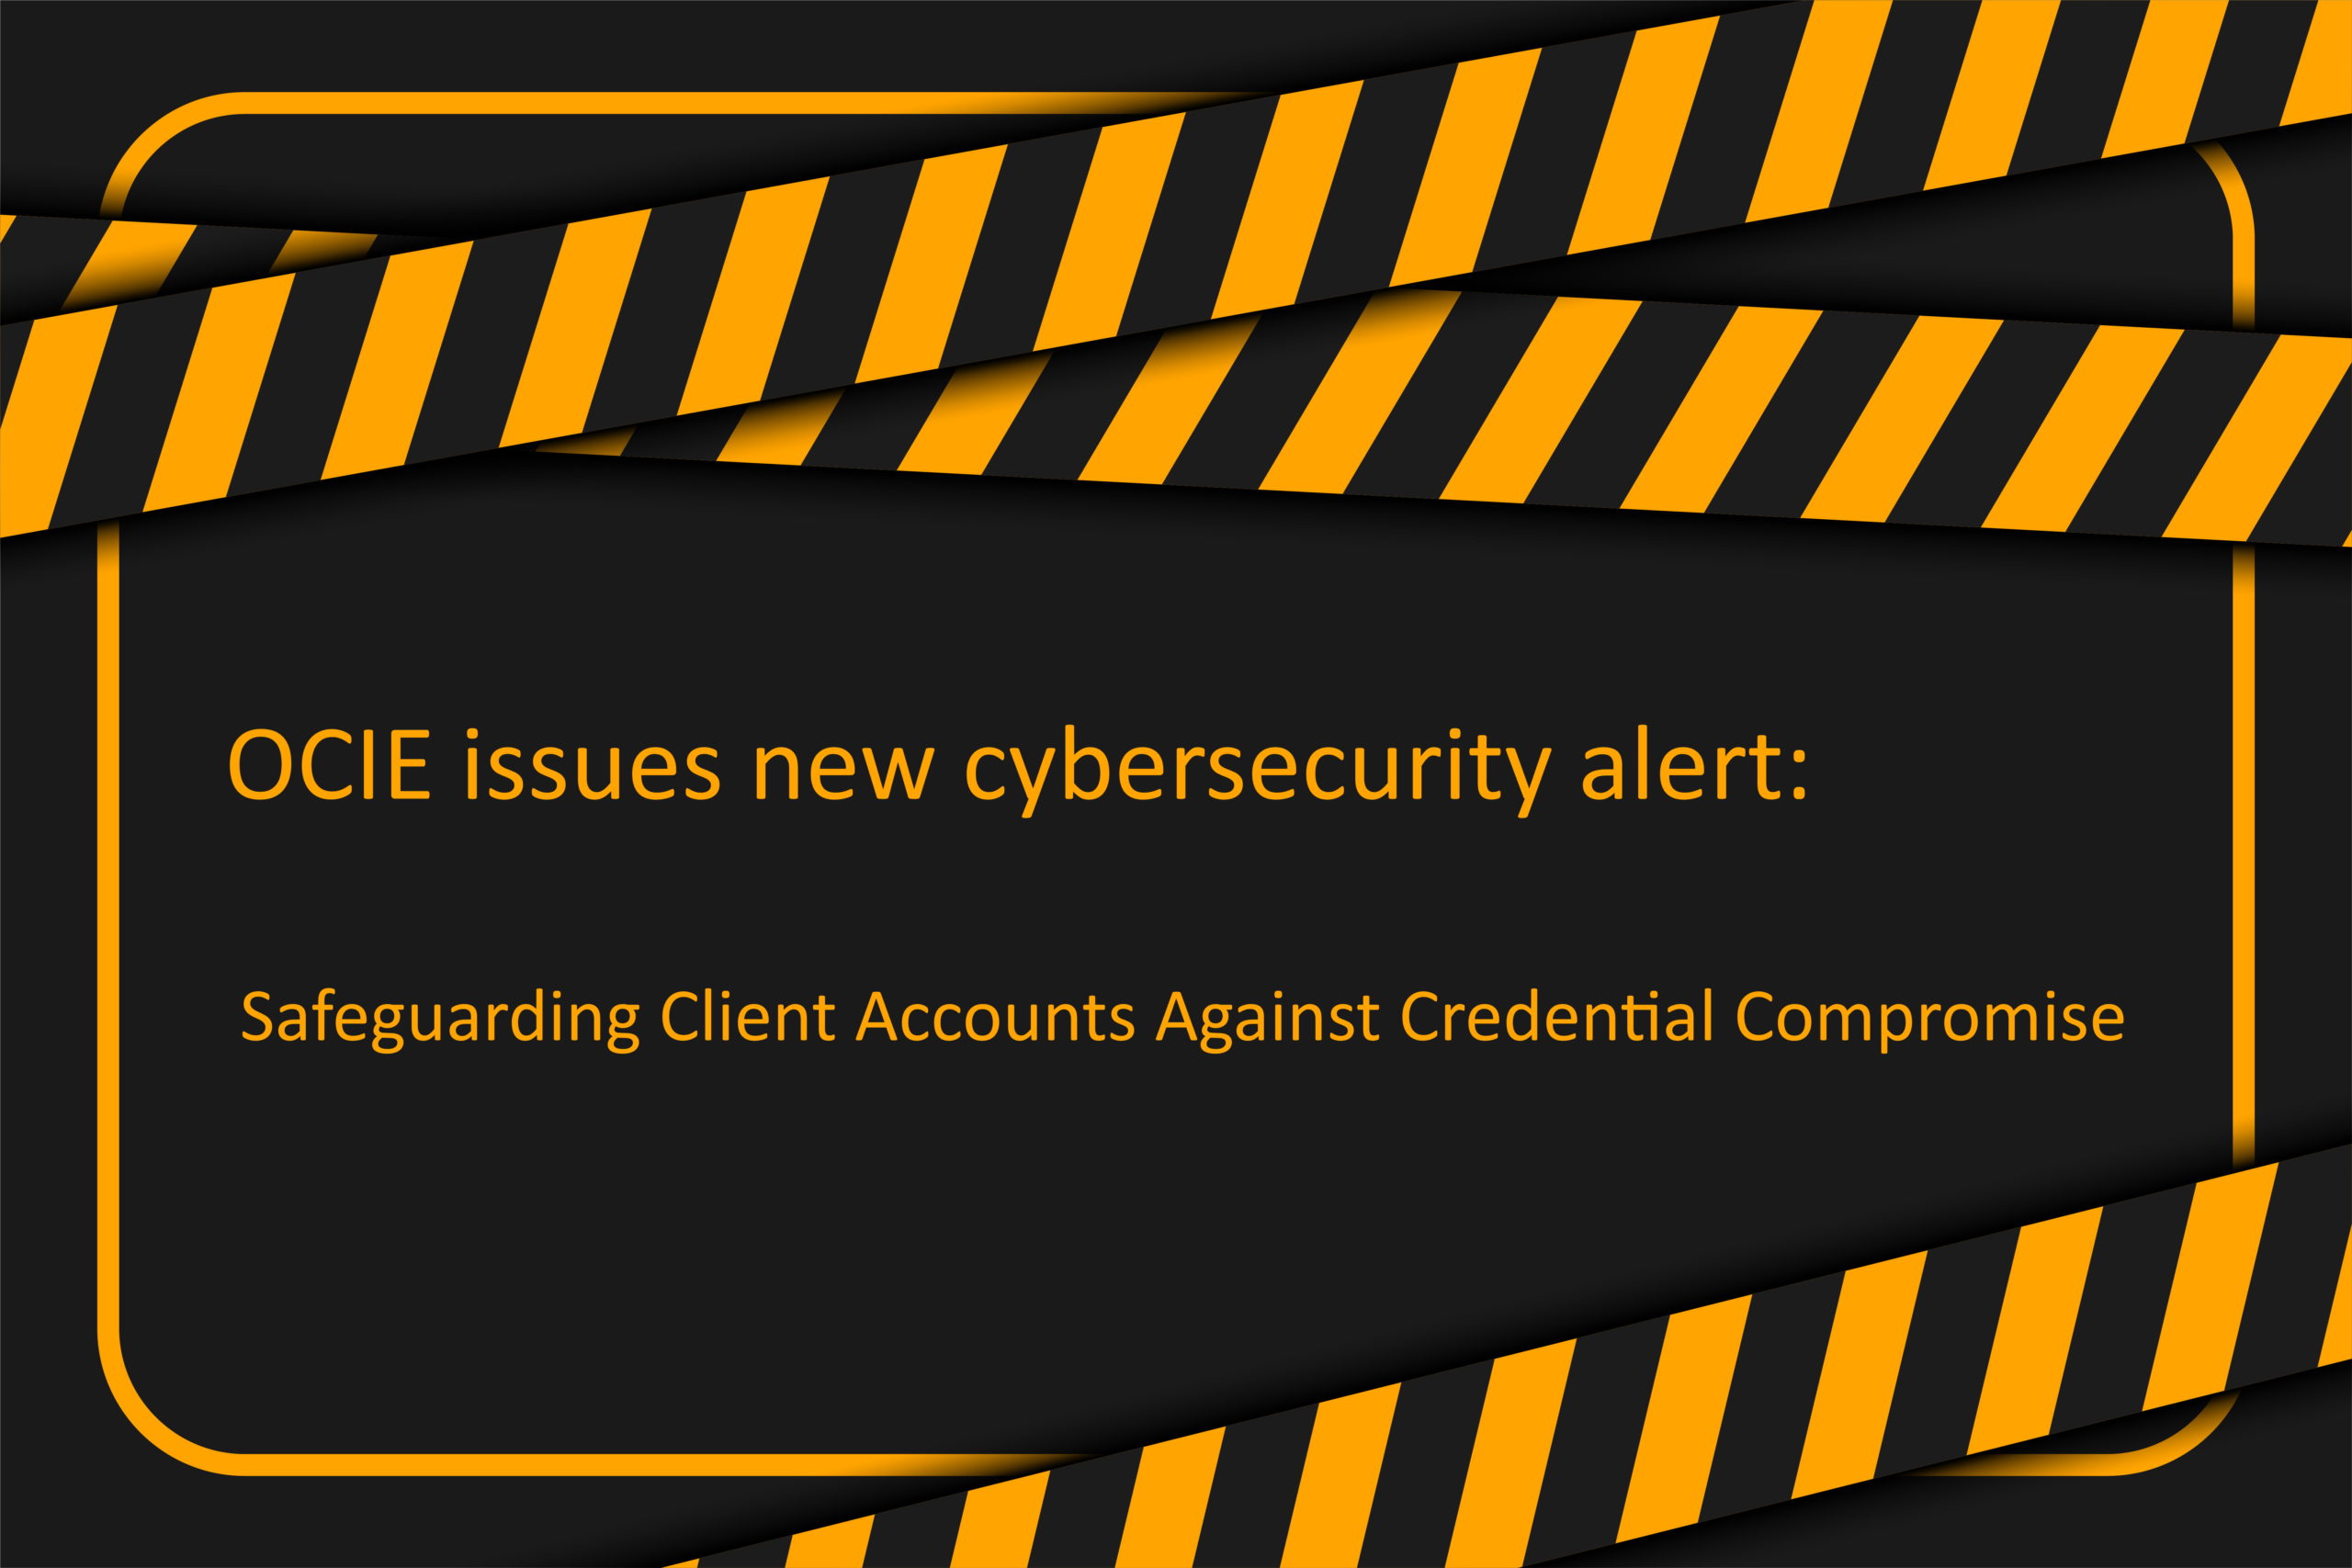 Safeguarding Client Accounts Against Credential Compromise